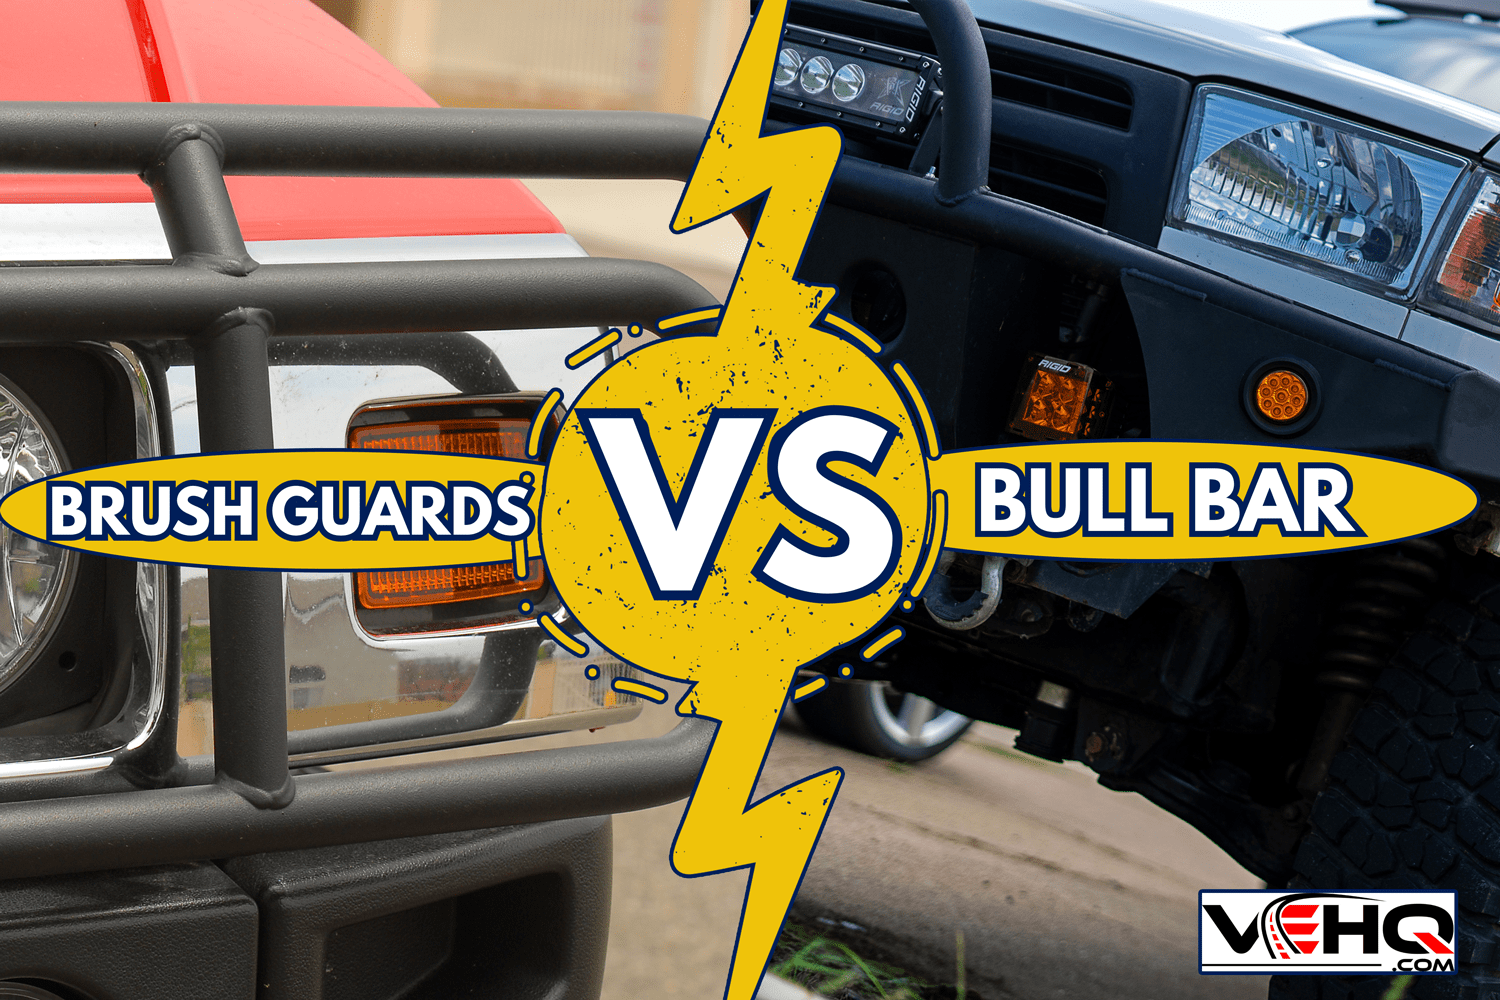 SUV headlight with grill guard - Bull Bar Vs Brush Guard Which To Choose